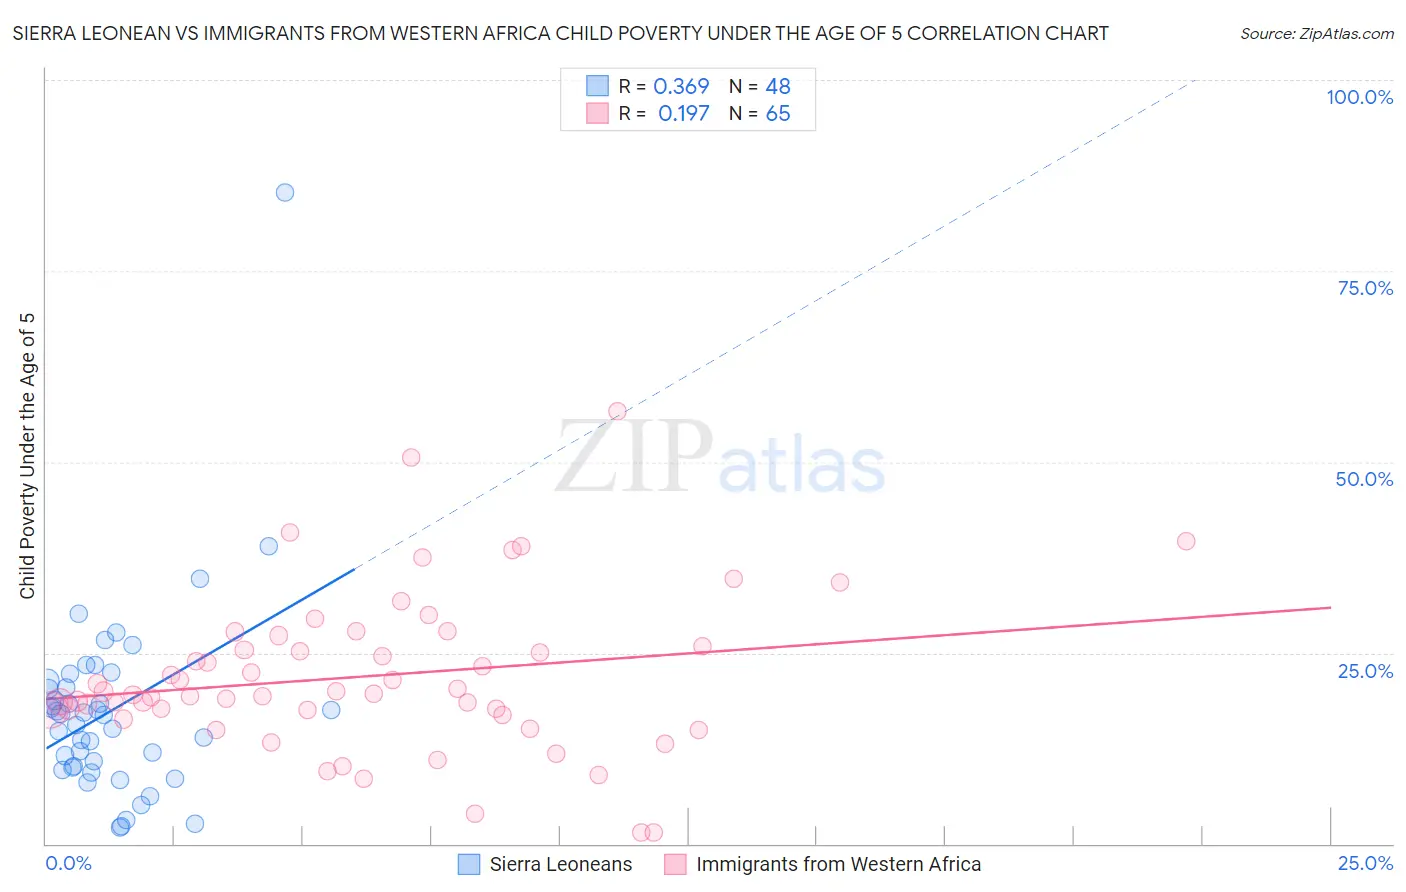 Sierra Leonean vs Immigrants from Western Africa Child Poverty Under the Age of 5